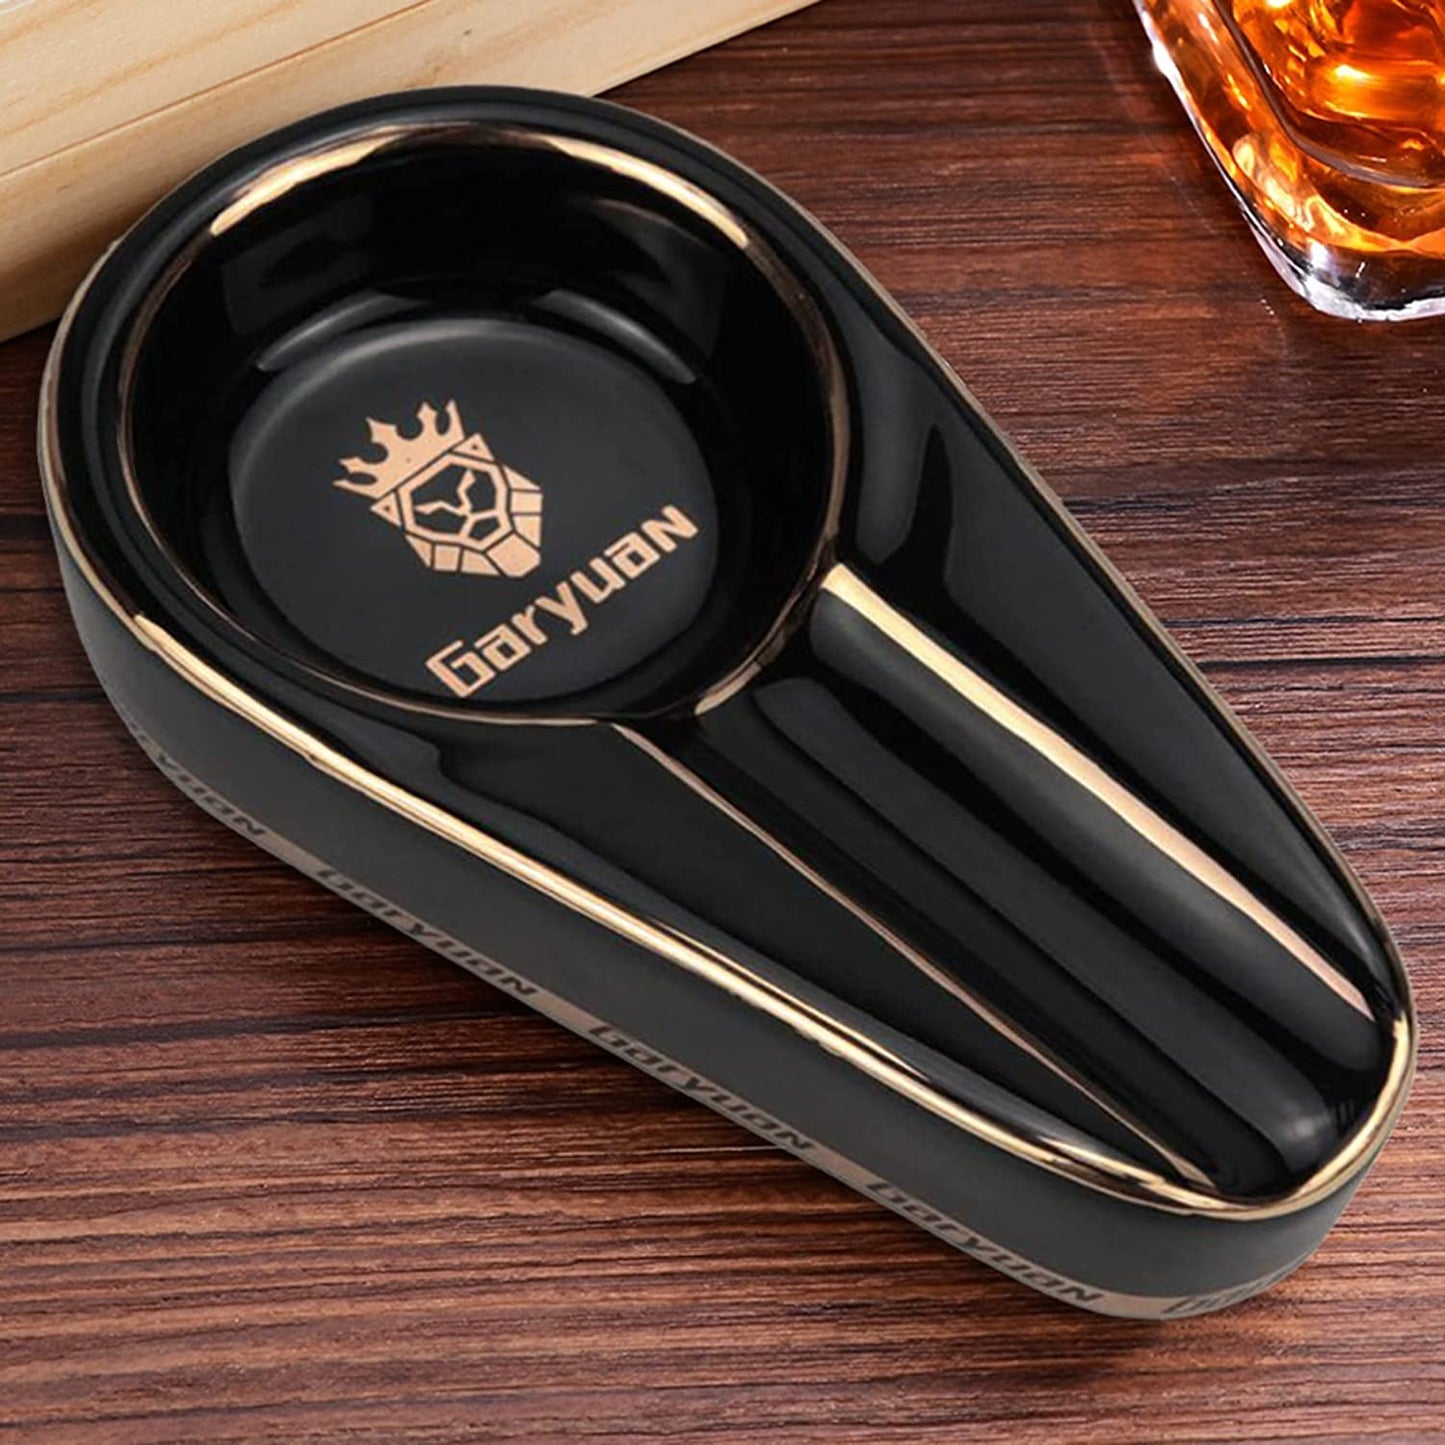 Cigar Ashtray Patio Single Ceramic Outdoor Ash Tray Cigars Portable Travel Porcelain Cigar Ashtrays Suitable for Gift Living Room Office Decoration (Black01)